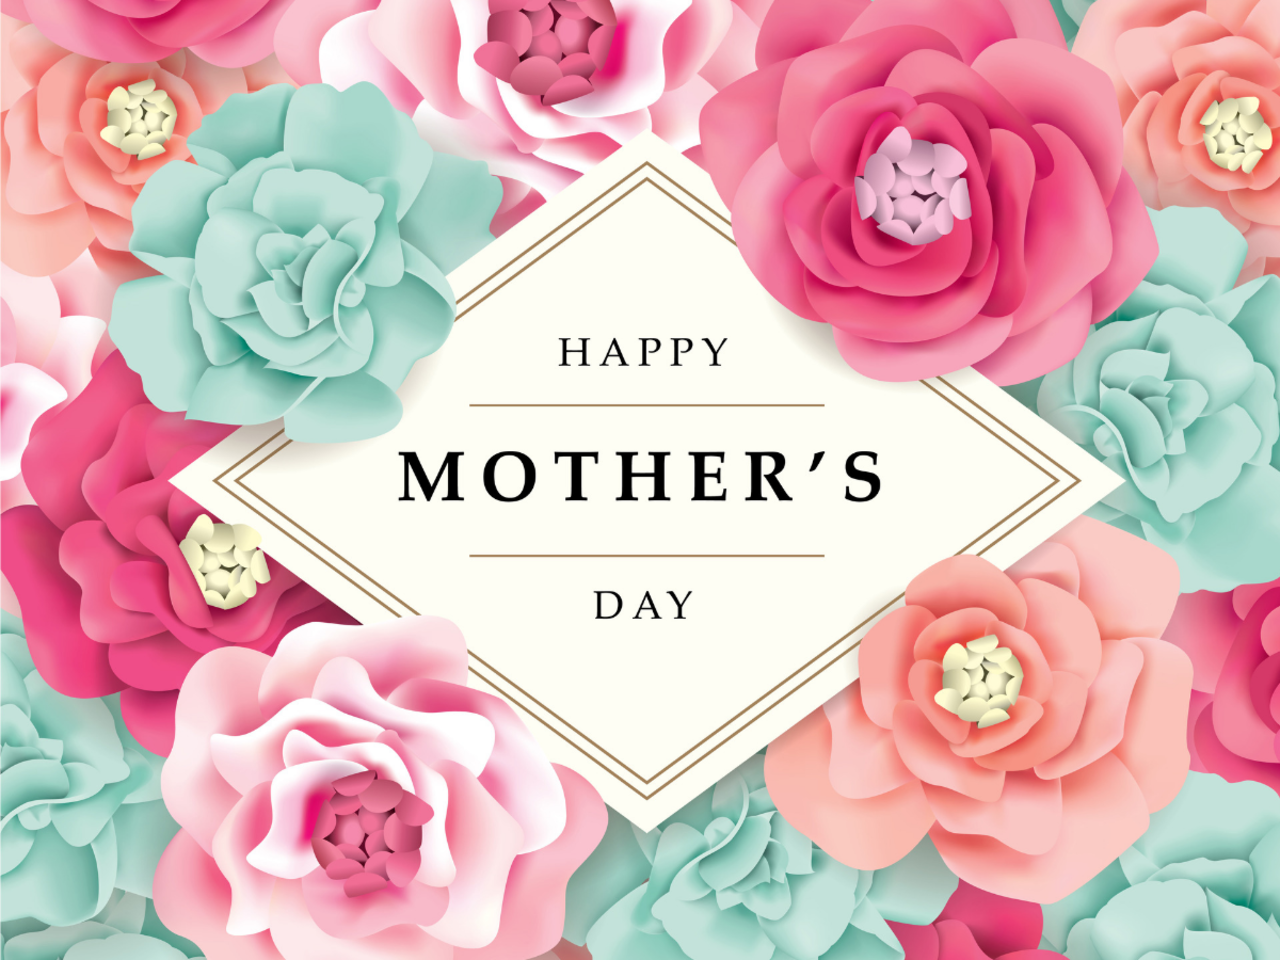 Happy Mother's Day 2023: Images, Quotes, Cards, Greetings ...